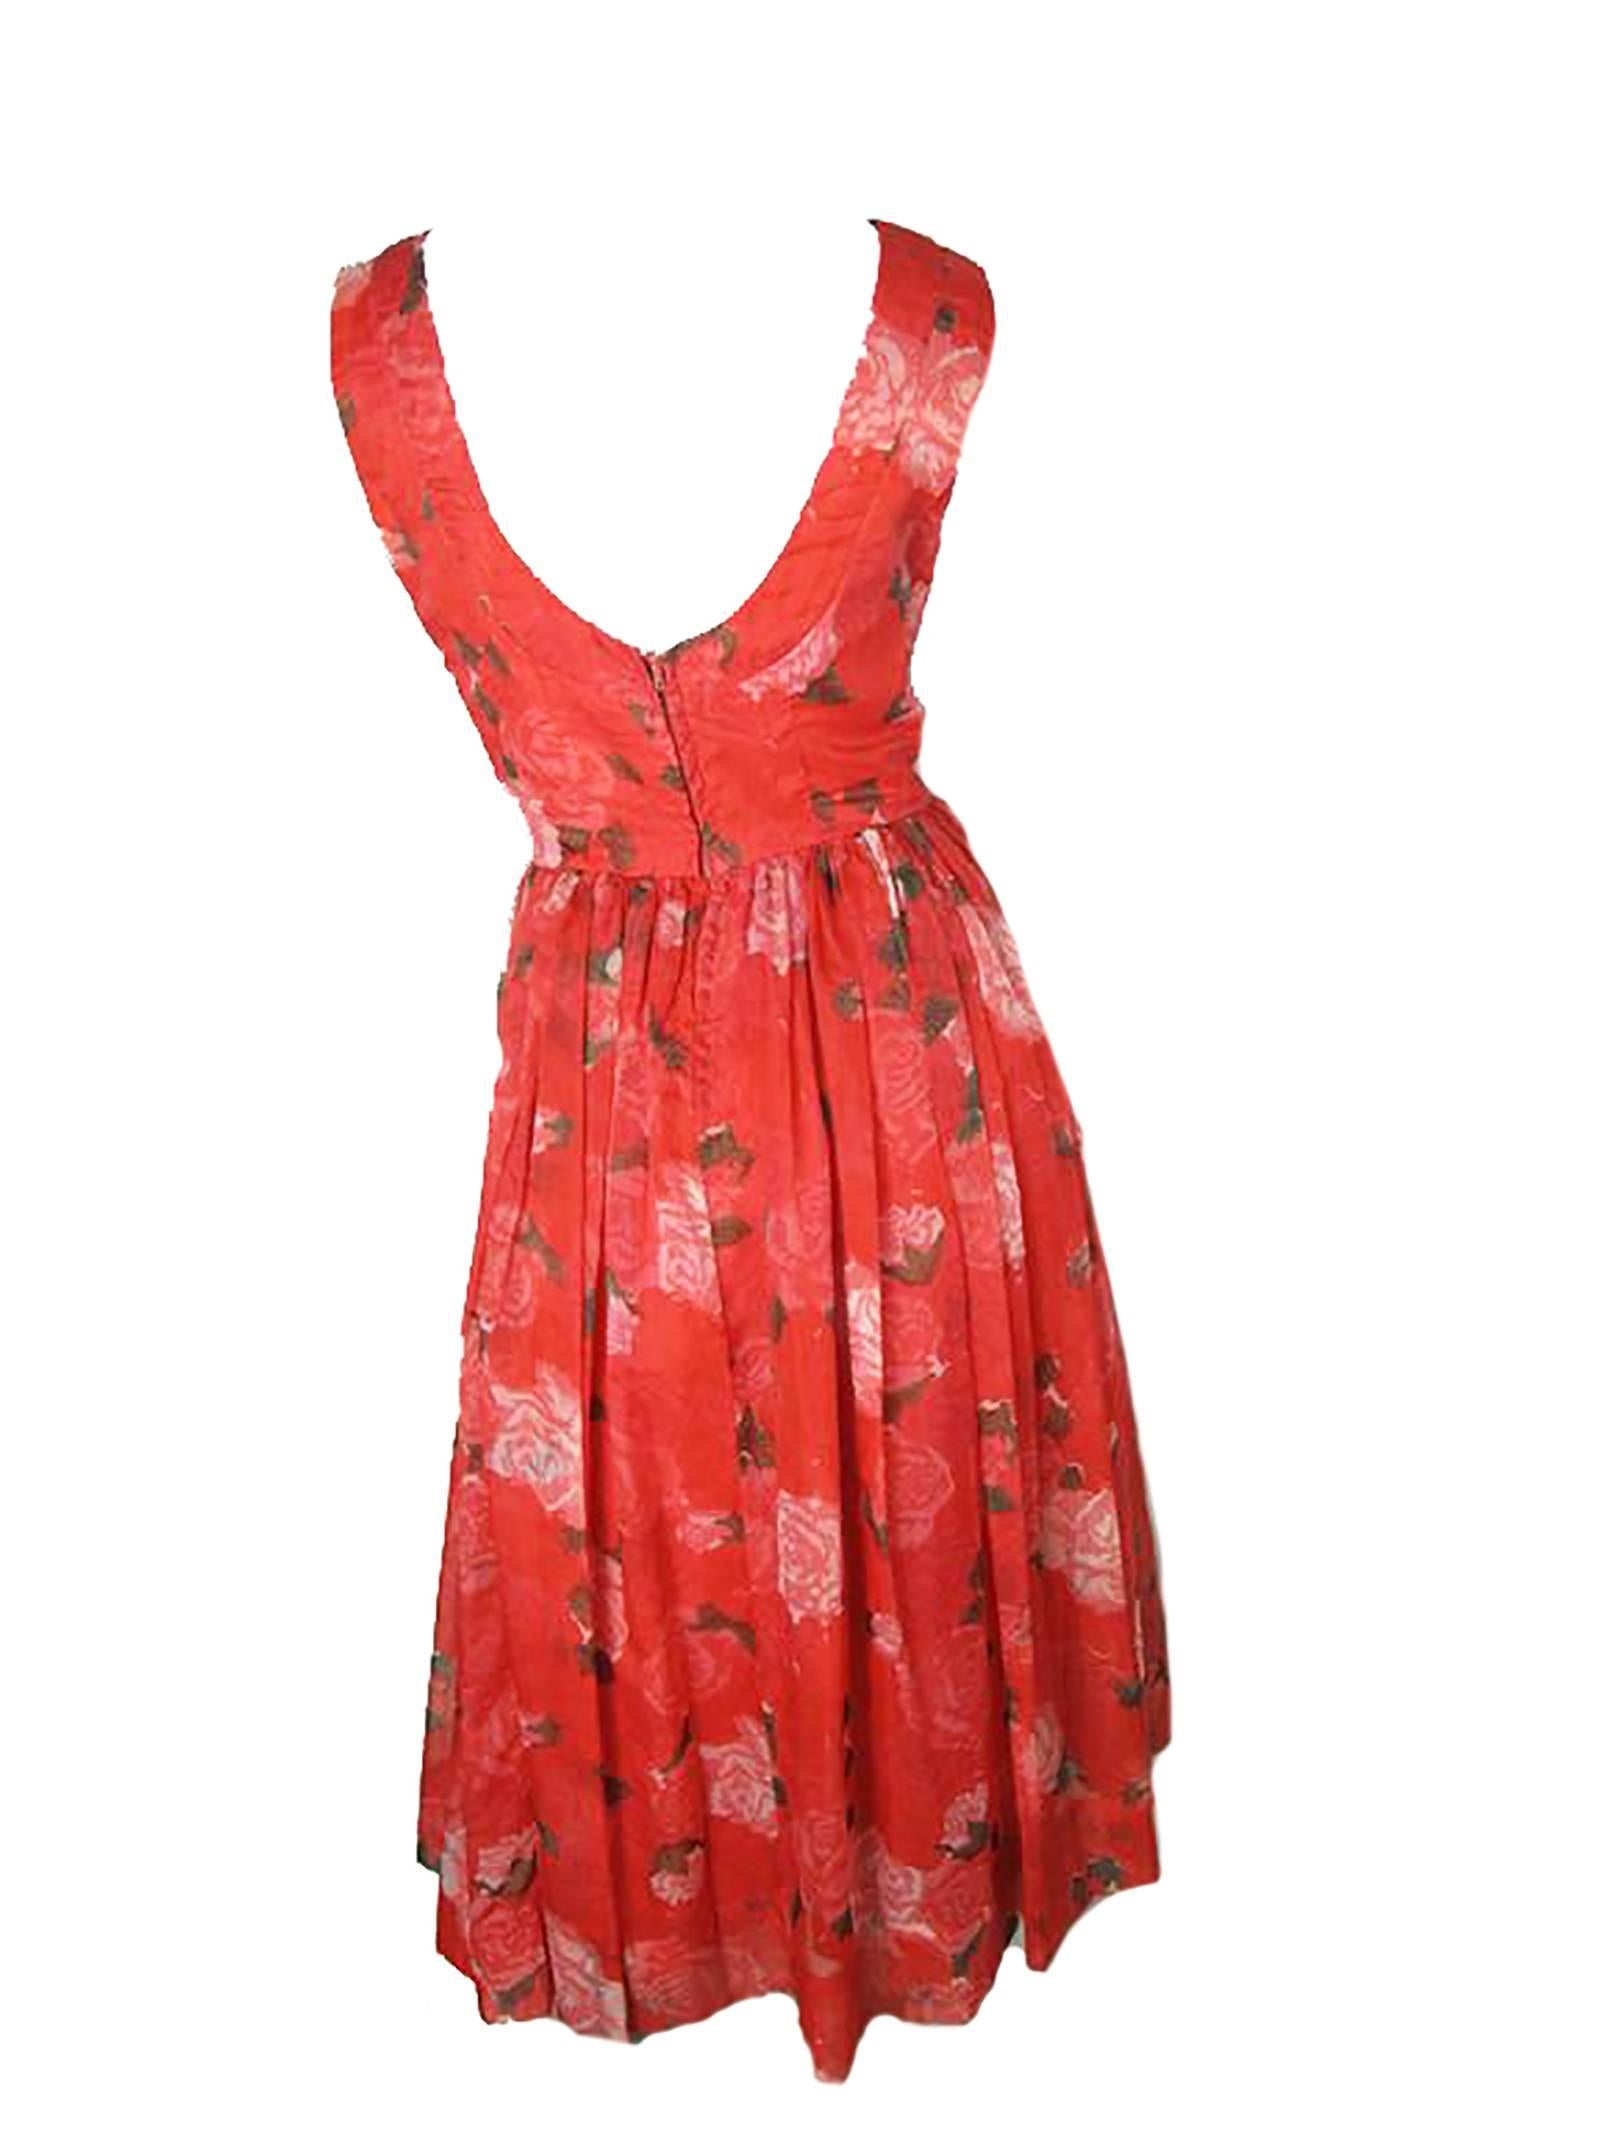 1950s floral dress.  Condition: Excellent. Size 6  

We accept returns for refund, please see our terms.  We offer free ground shipping within the US. 